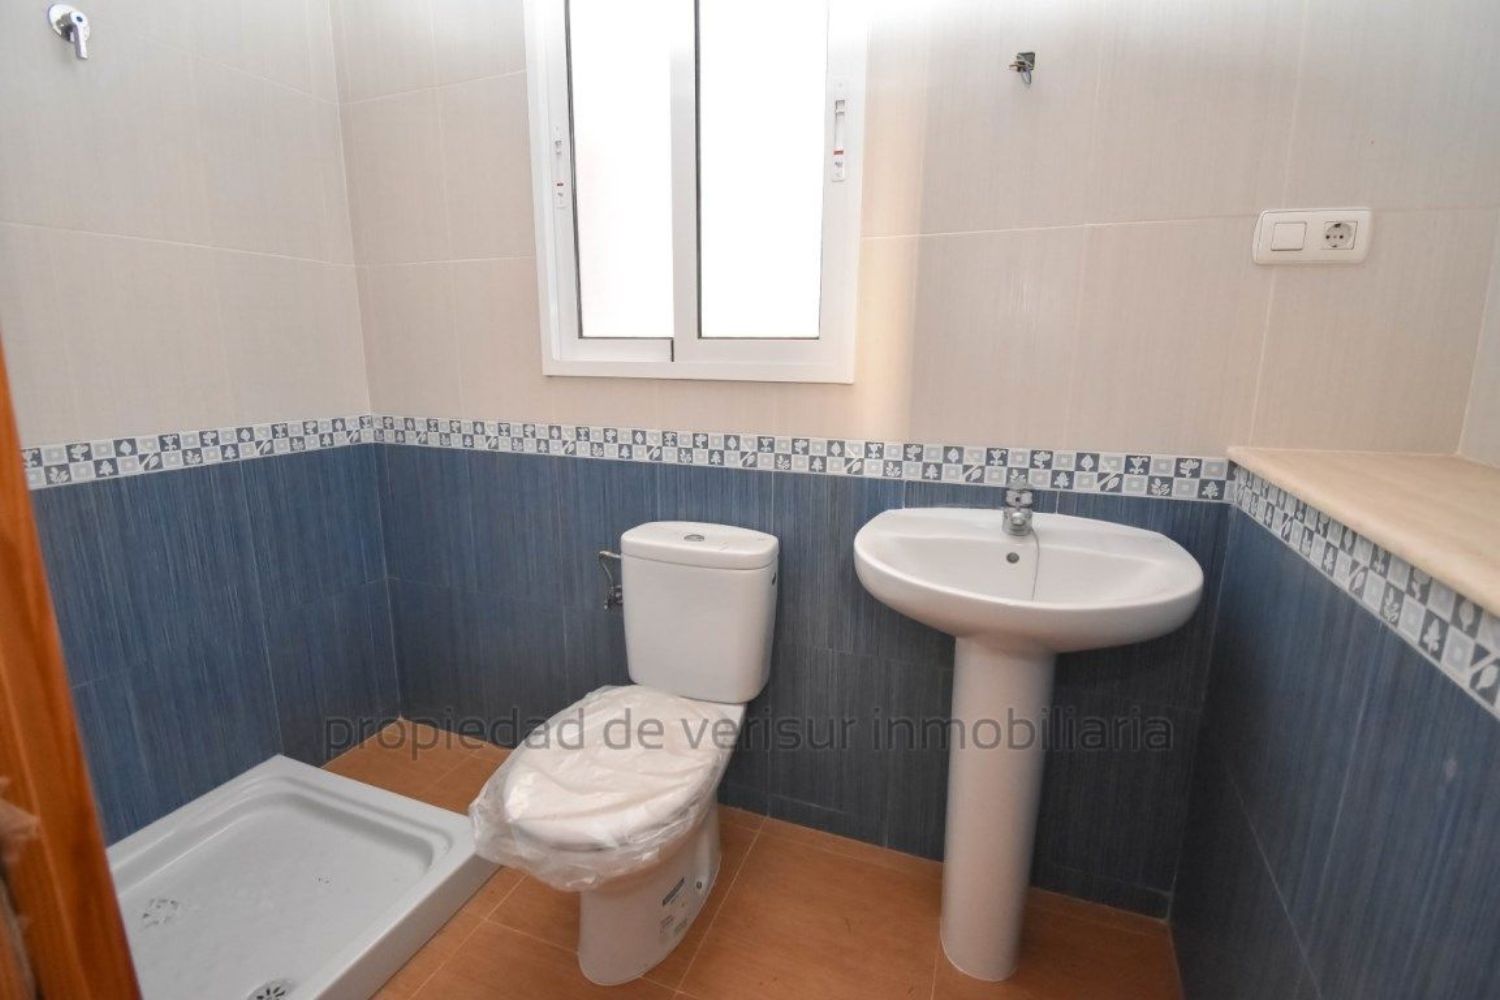 Flat for sale in Águilas